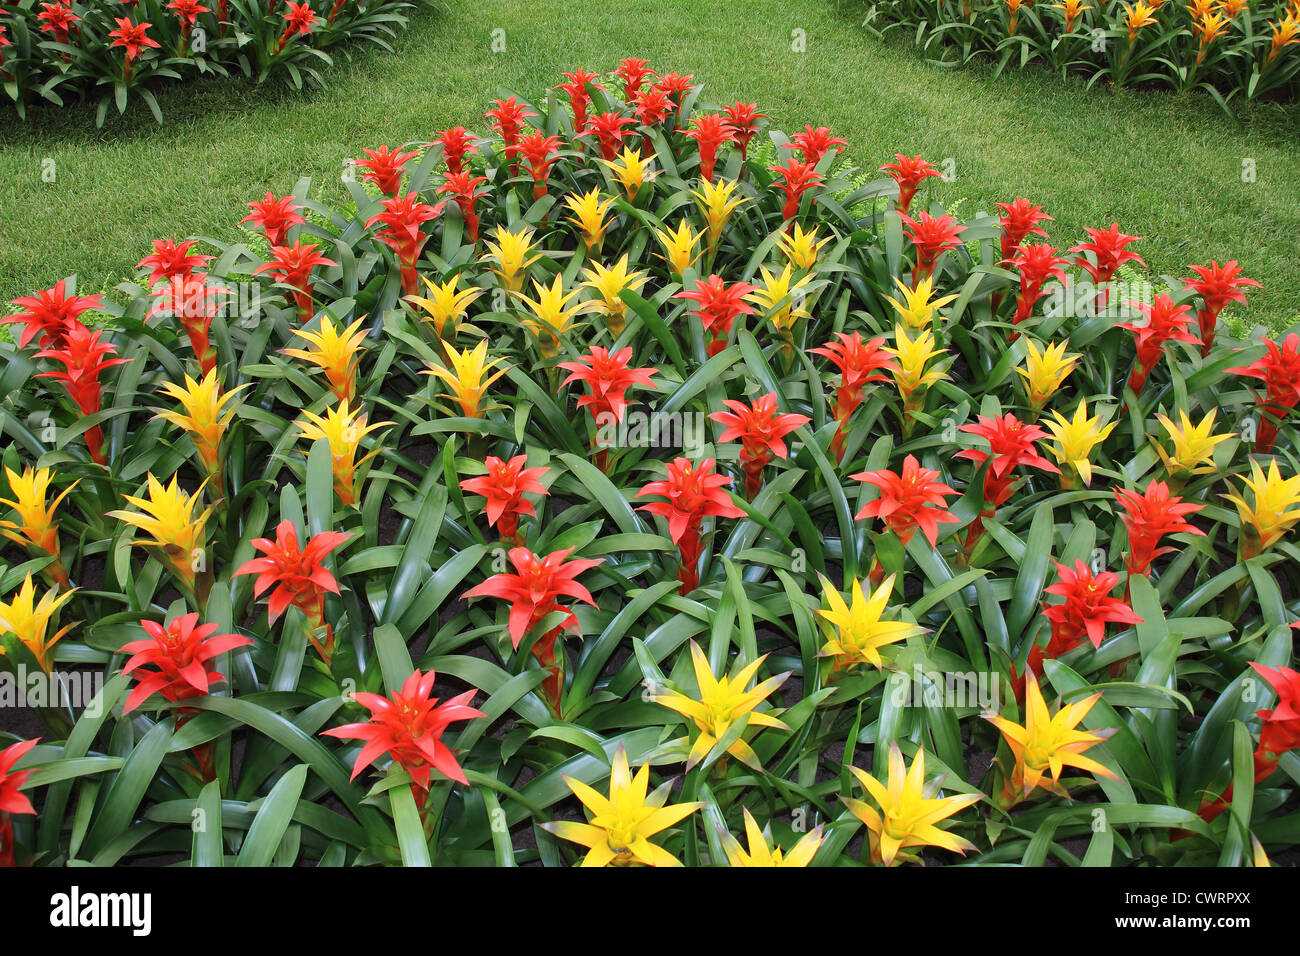 Yellow and red flowers guzmania beautiful green leaves Stock Photo